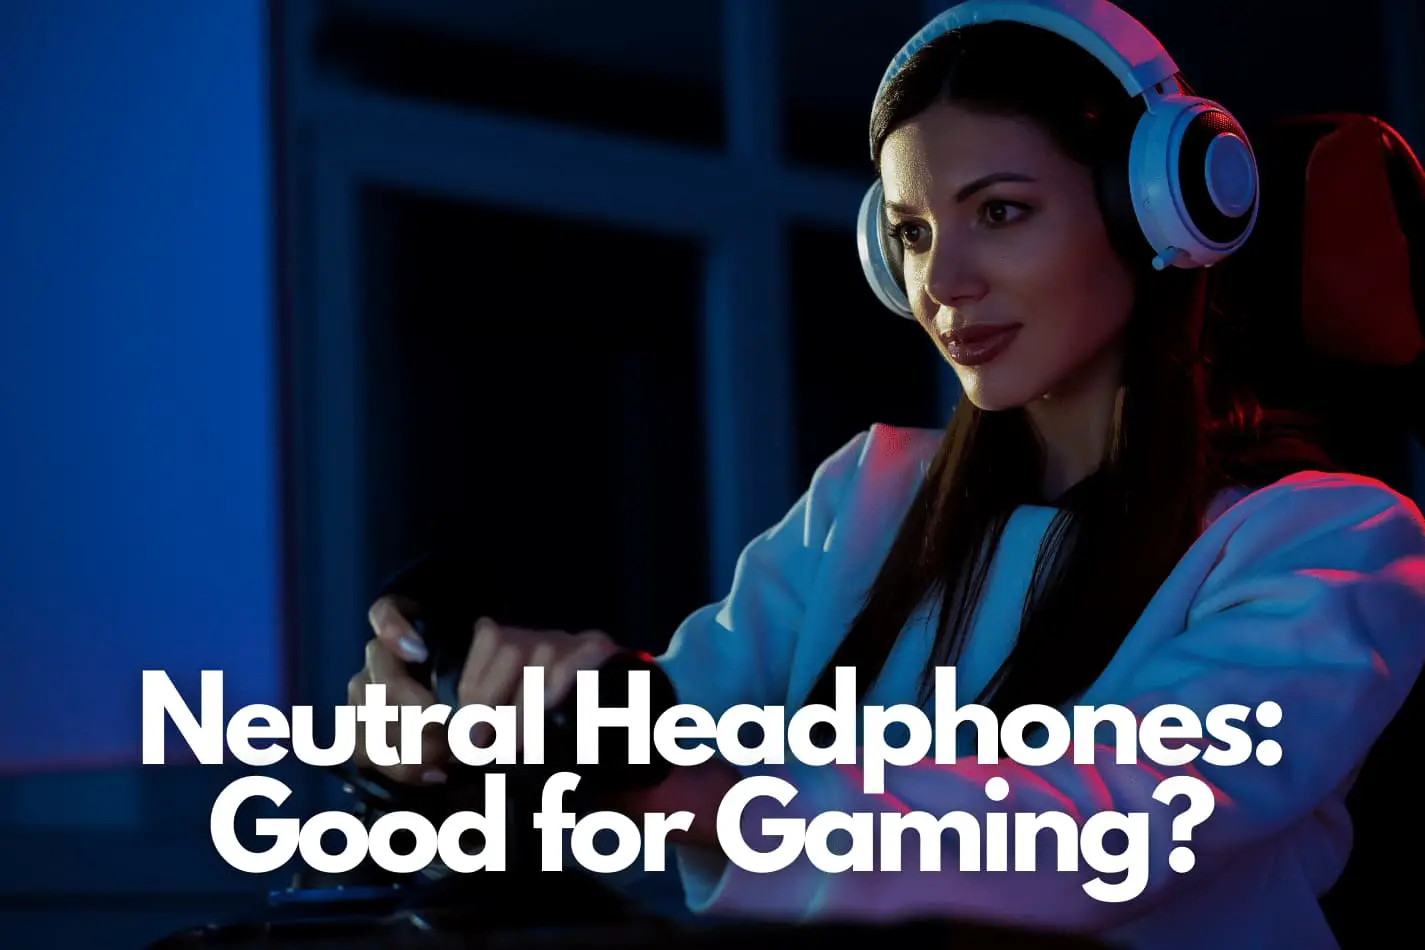 Woman gamer wearing headphones while playing games on her pc